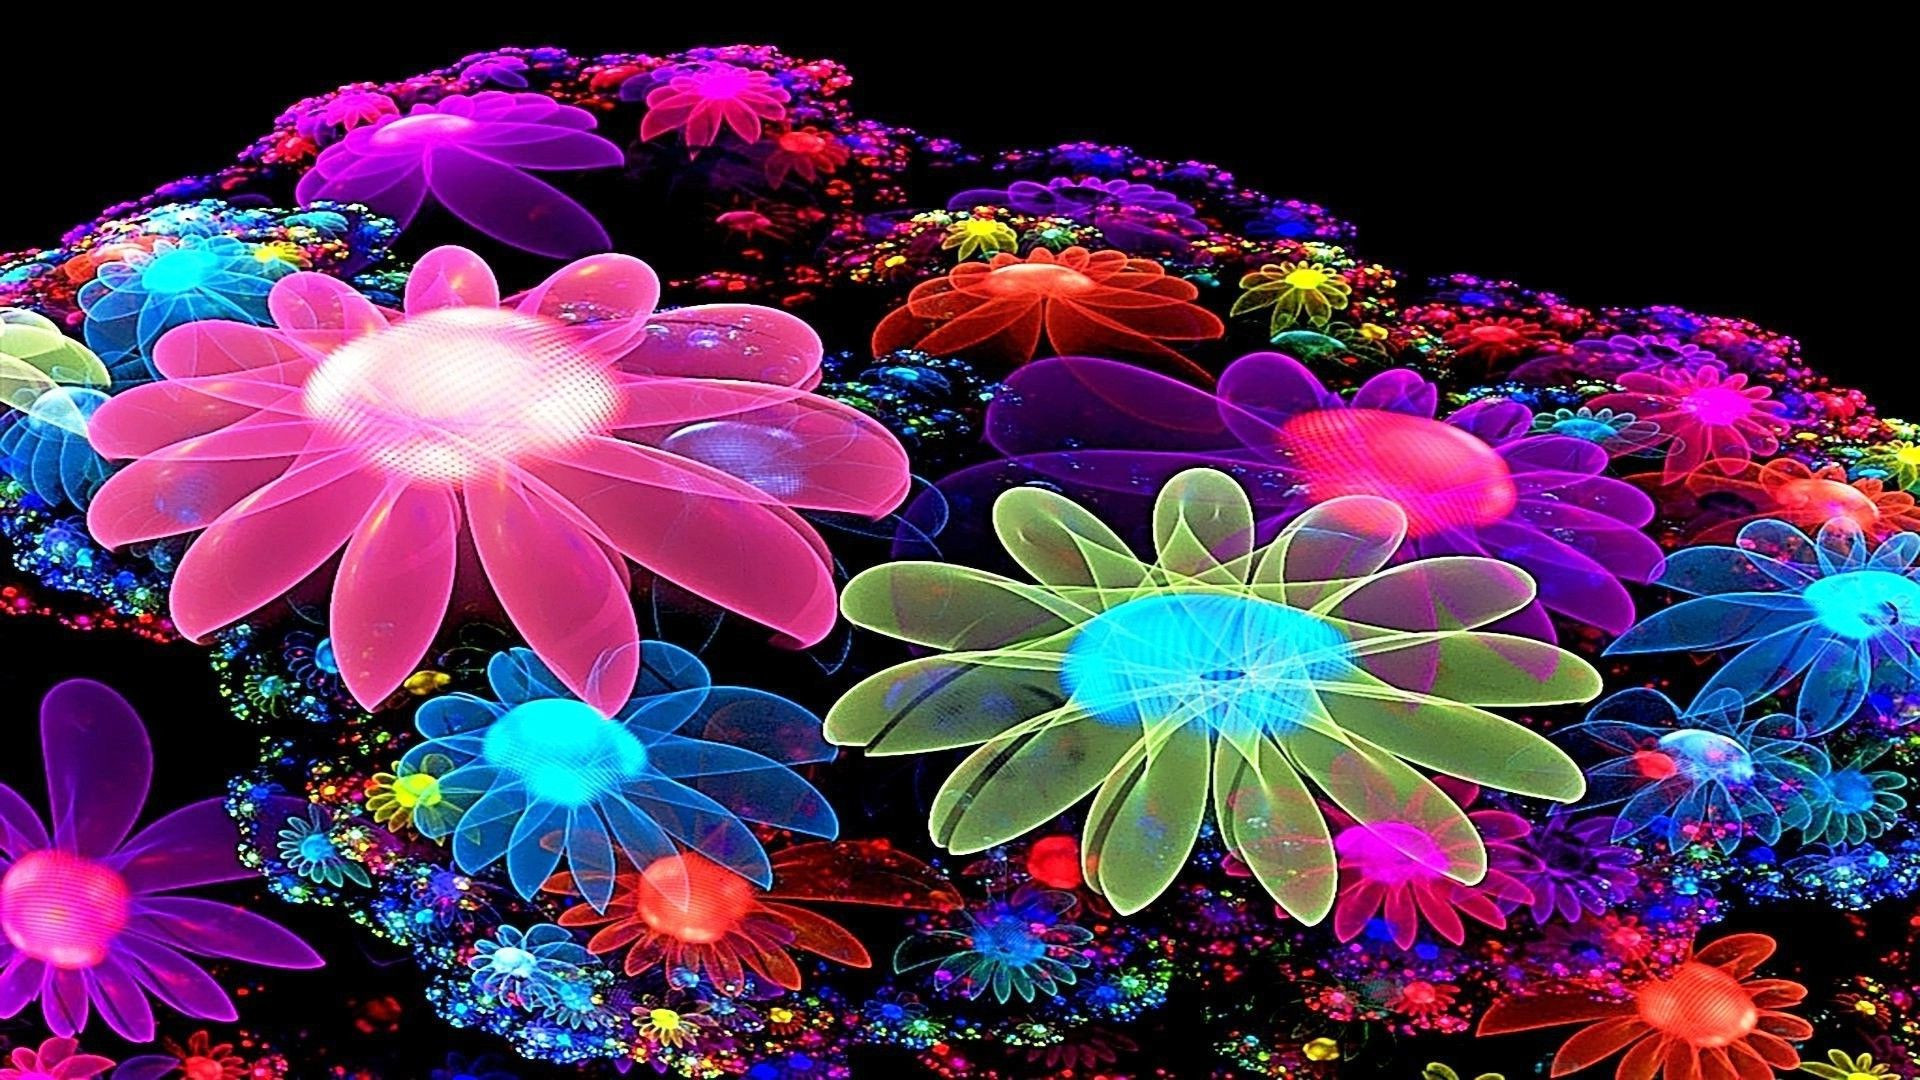 Hd Floral Wallpapers Wallpapers For Desktop Background 3d Illustration Of  Bright Fuchsia Fractal Floral Pattern In Dark Tunnel As Abstract Background  Hd Photography Photo Background Image And Wallpaper for Free Download